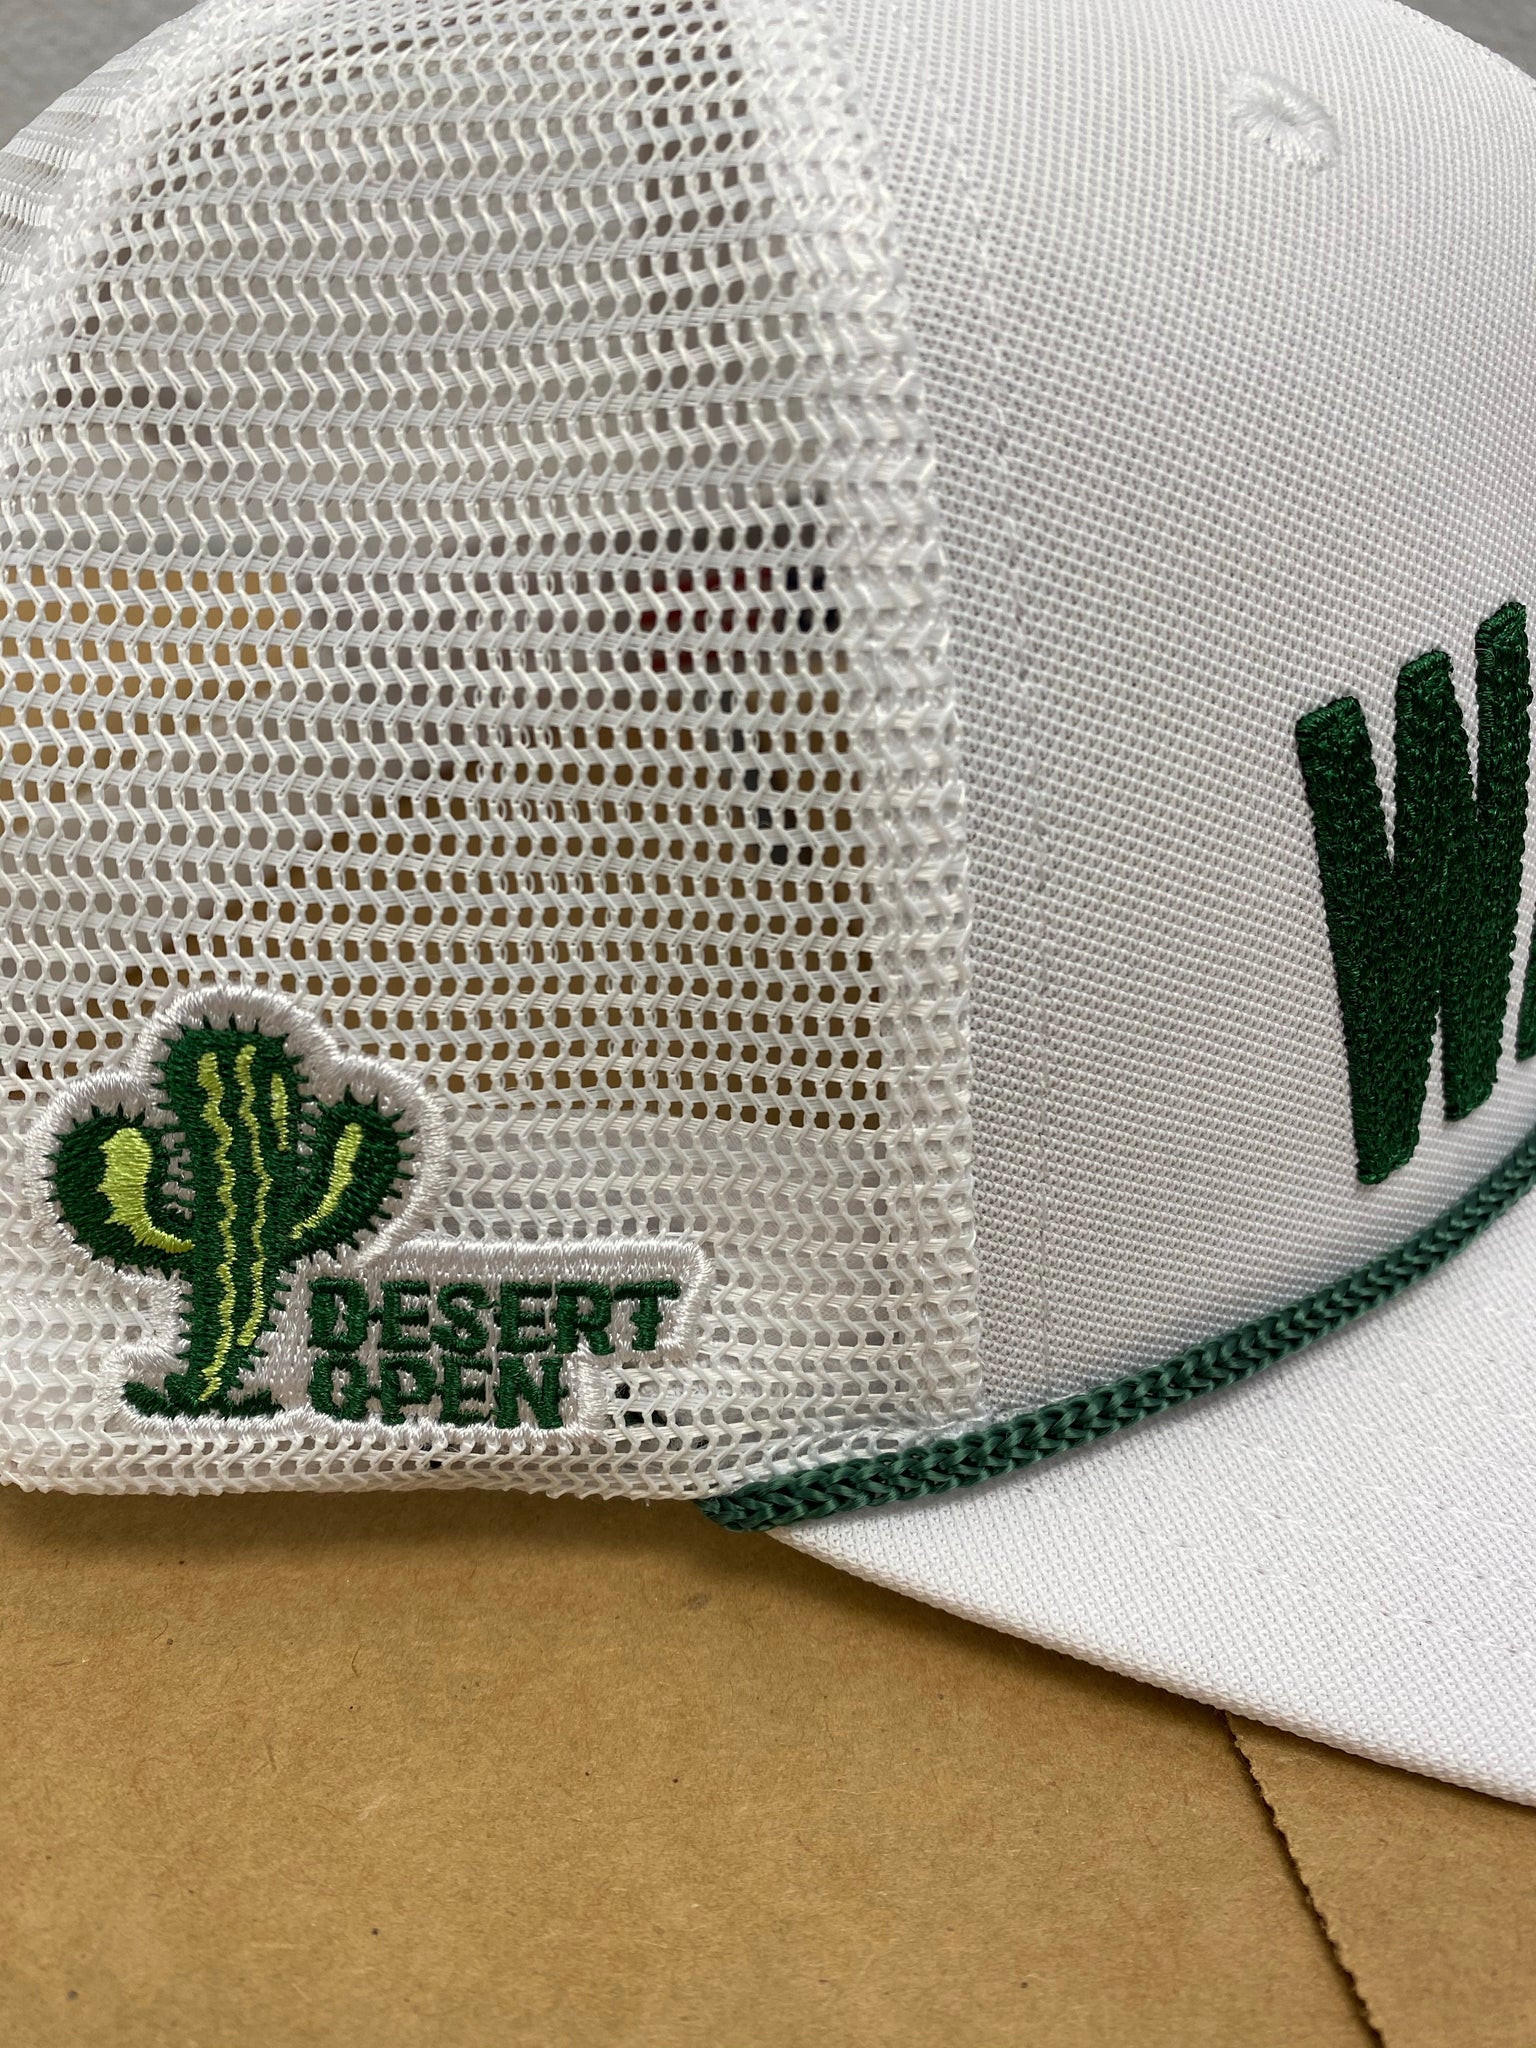 WaStEd Management ROPE Snapback Flat Bill WHITE